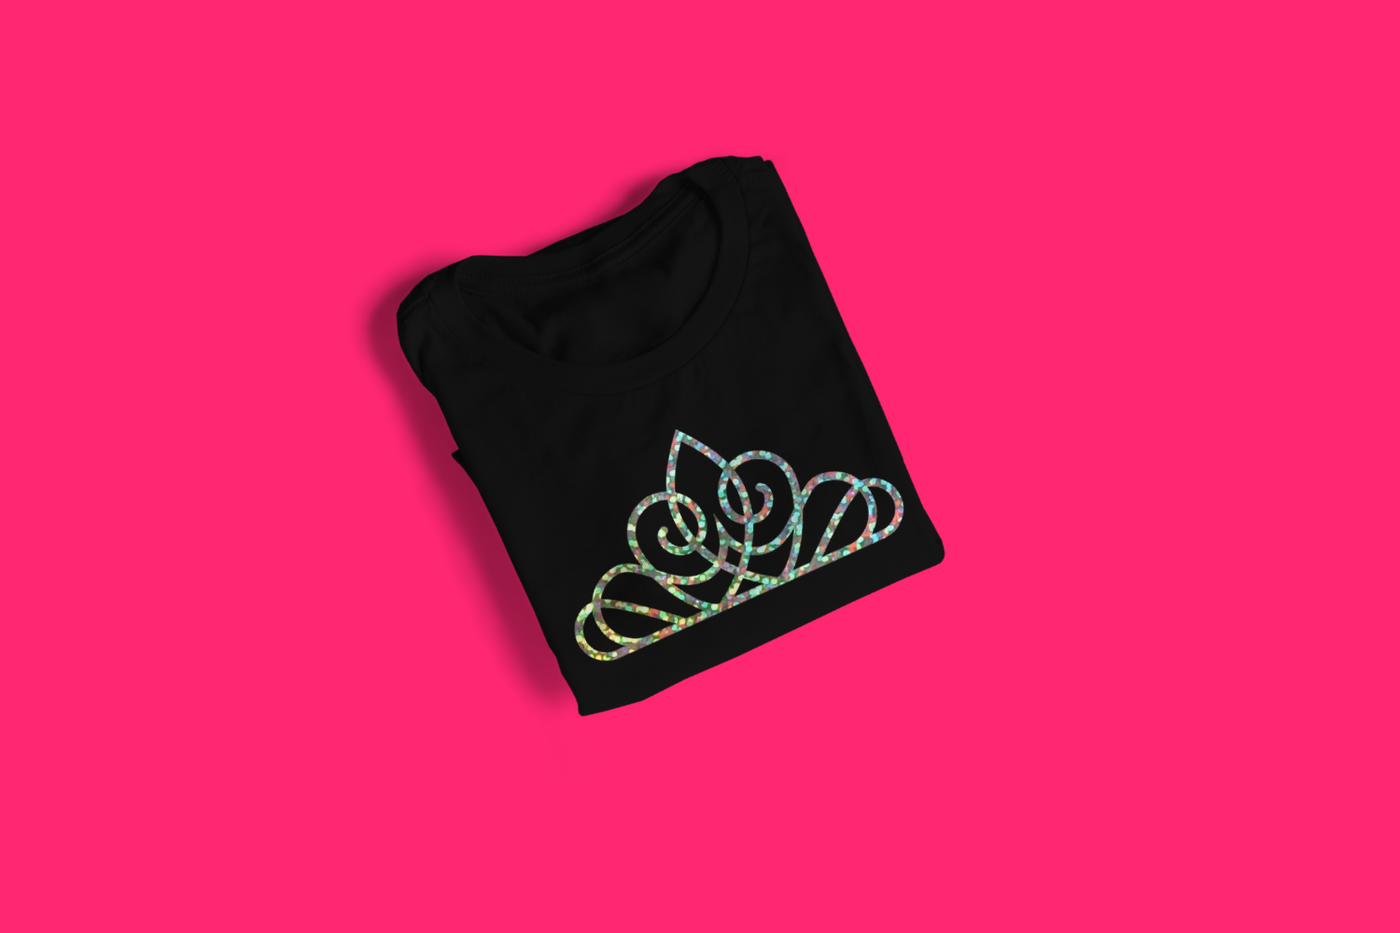 A black folded tee on a hot pink background. In the center is a tiara done in holographic heat transfer vinyl.